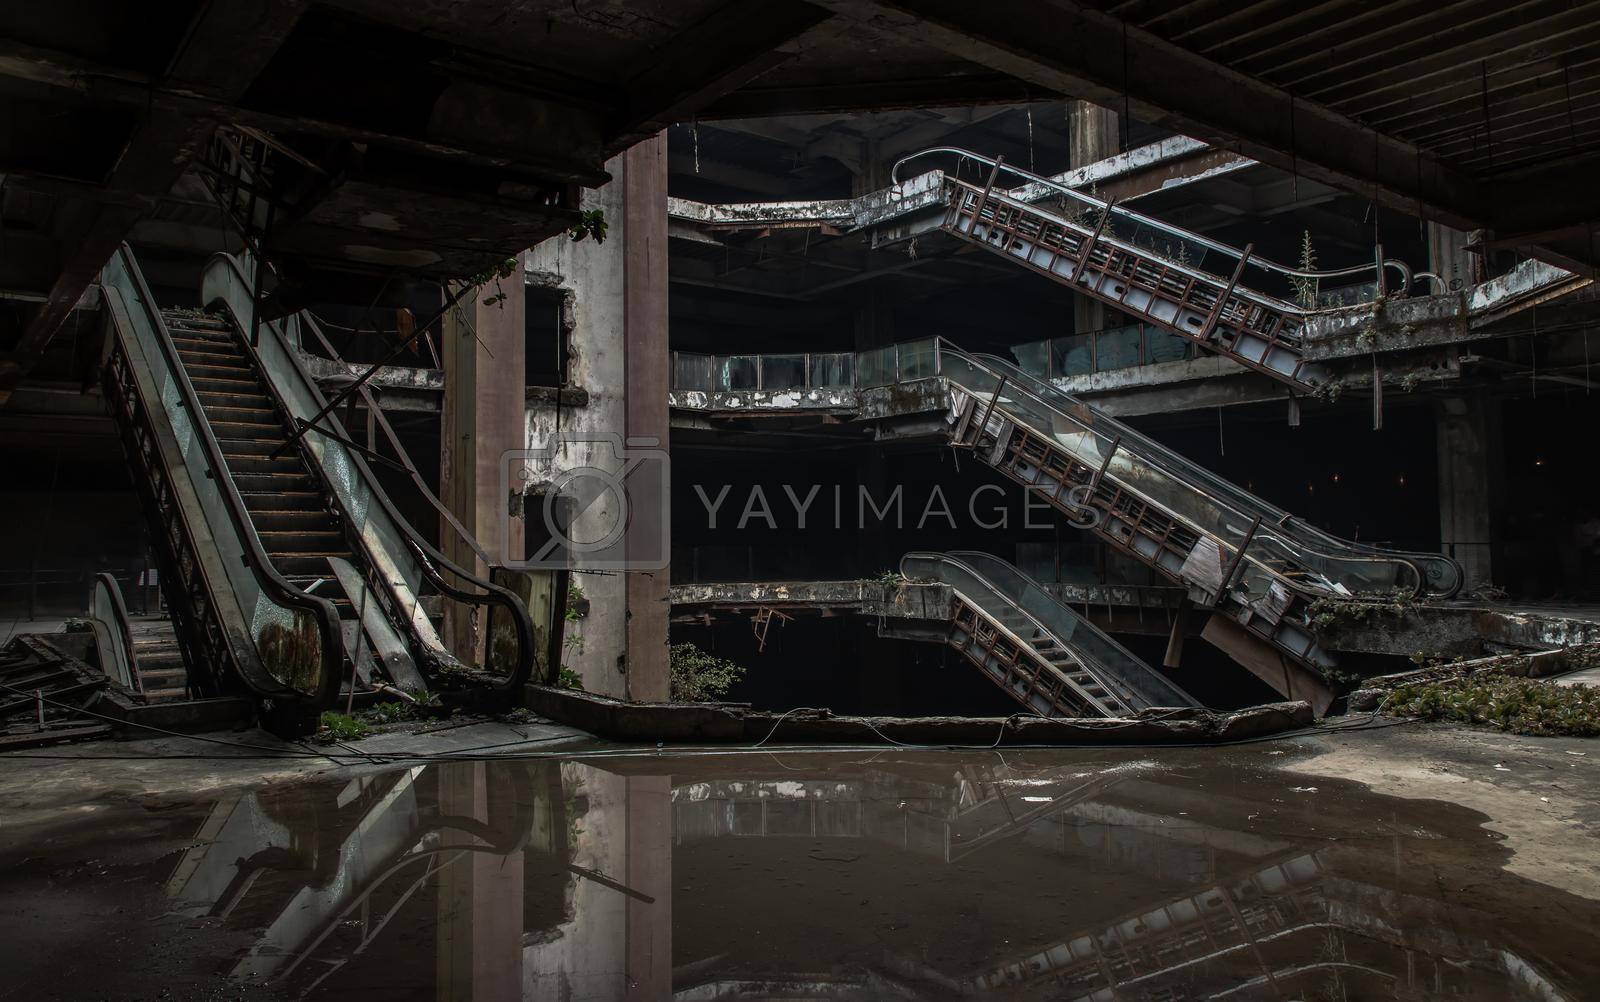 Bangkok, Thailand - 07 Feb 2022 : Damaged escalators and waterlogged in abandoned shopping mall building. Structural and ruins was left to deteriorate over time, New World Mall, No focus, specifically.